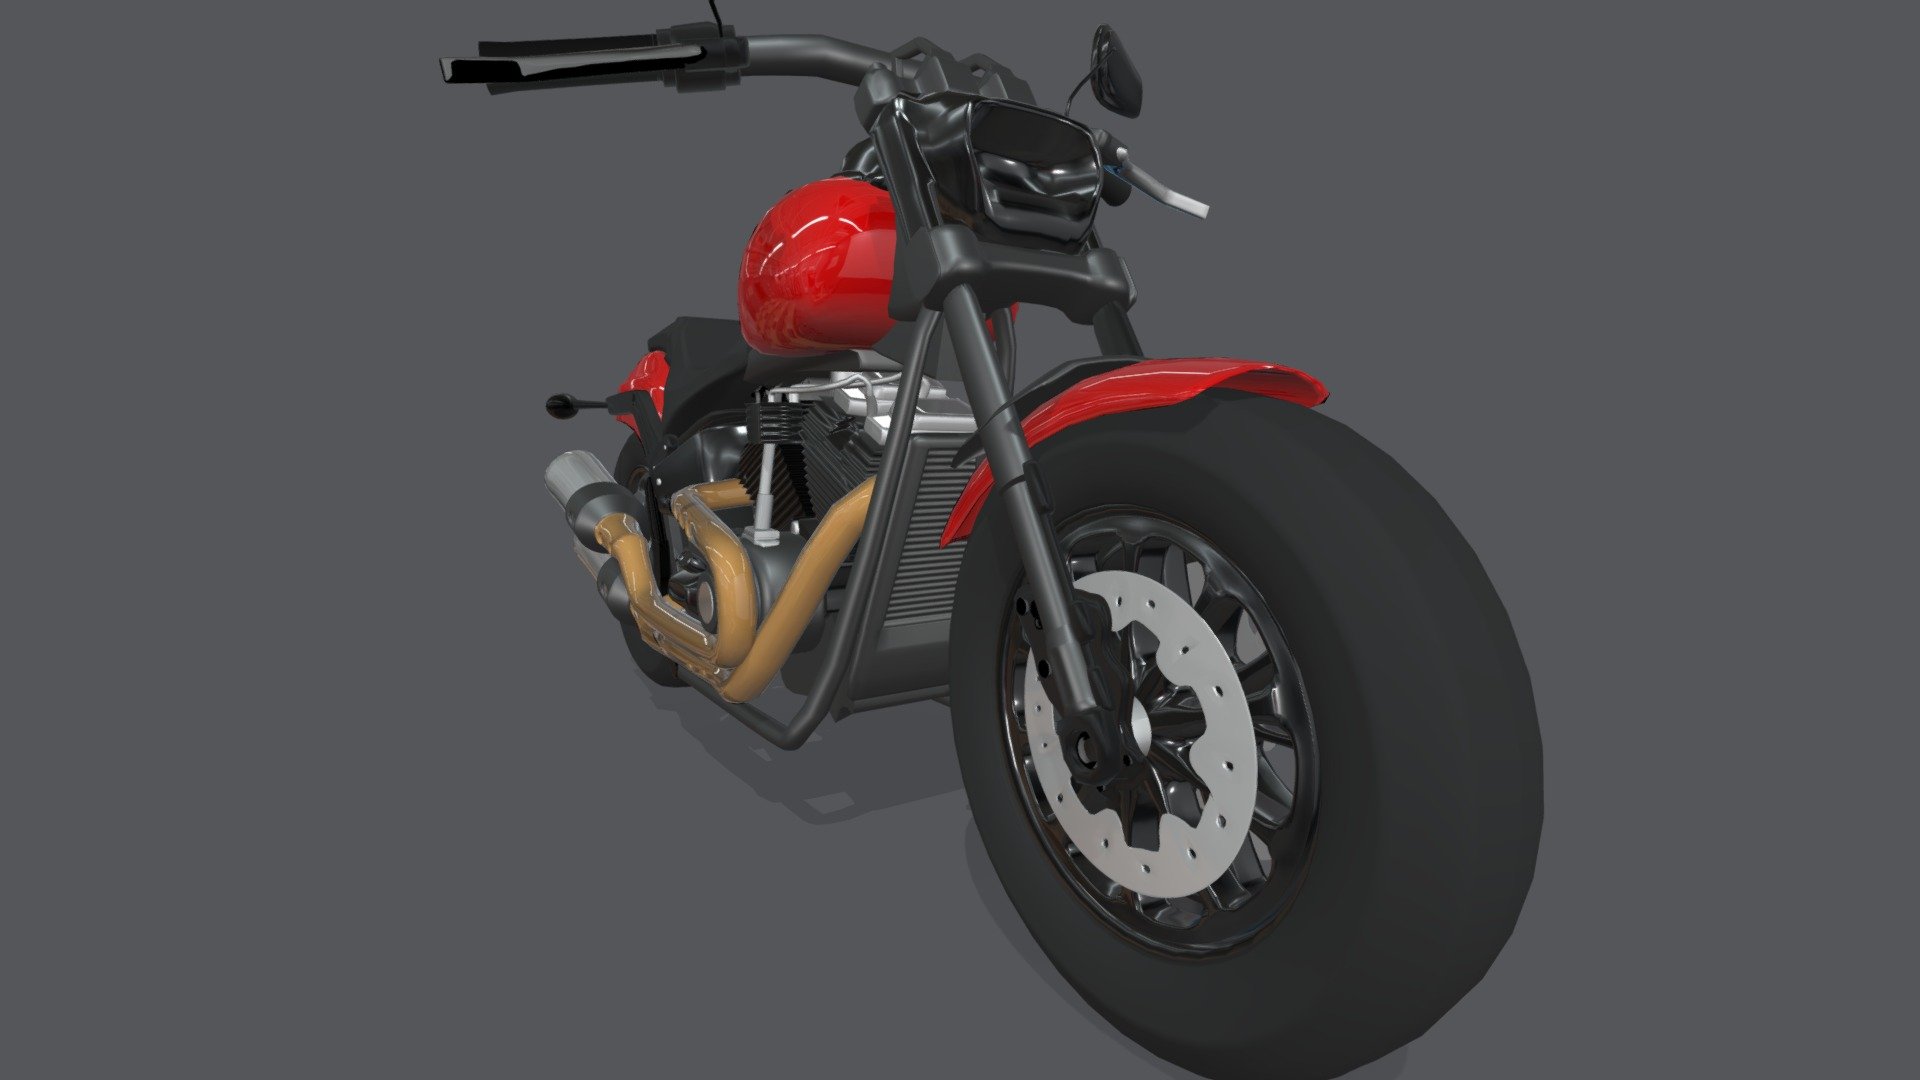 3D model of a Harley Fat Bob motorcycle with materials for multiple uses. see the image link for a rendering example:

https://drive.google.com/file/d/1e2vbTUT_tnNTveh3SKKZqDPqwBTqV7rN/view?usp=sharing

It took 100 hours aprox.

I accept comments and feedback :D.

Thanks - Harley Fat Bob Smoother V2 - 3D model by CristianSantana 3d model